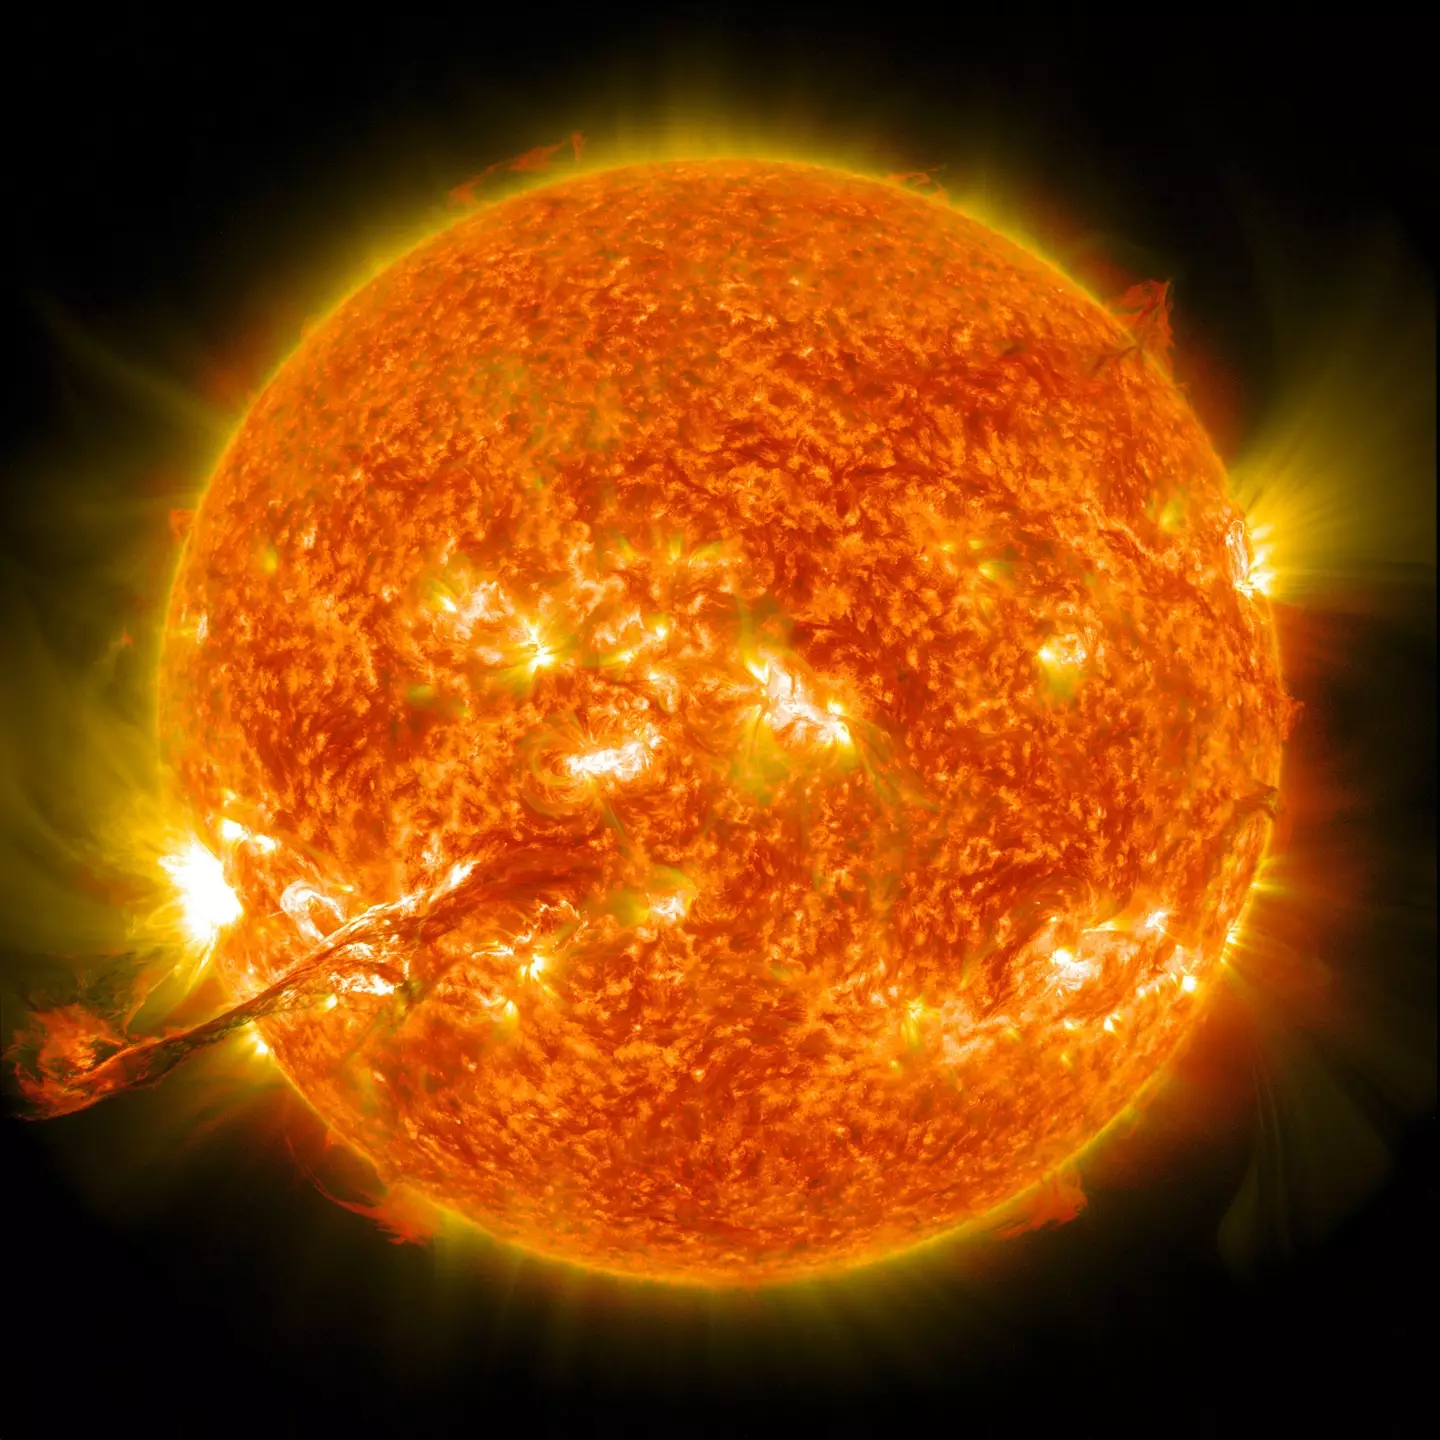 CMEs are large expulsions of the Sun’s plasma.